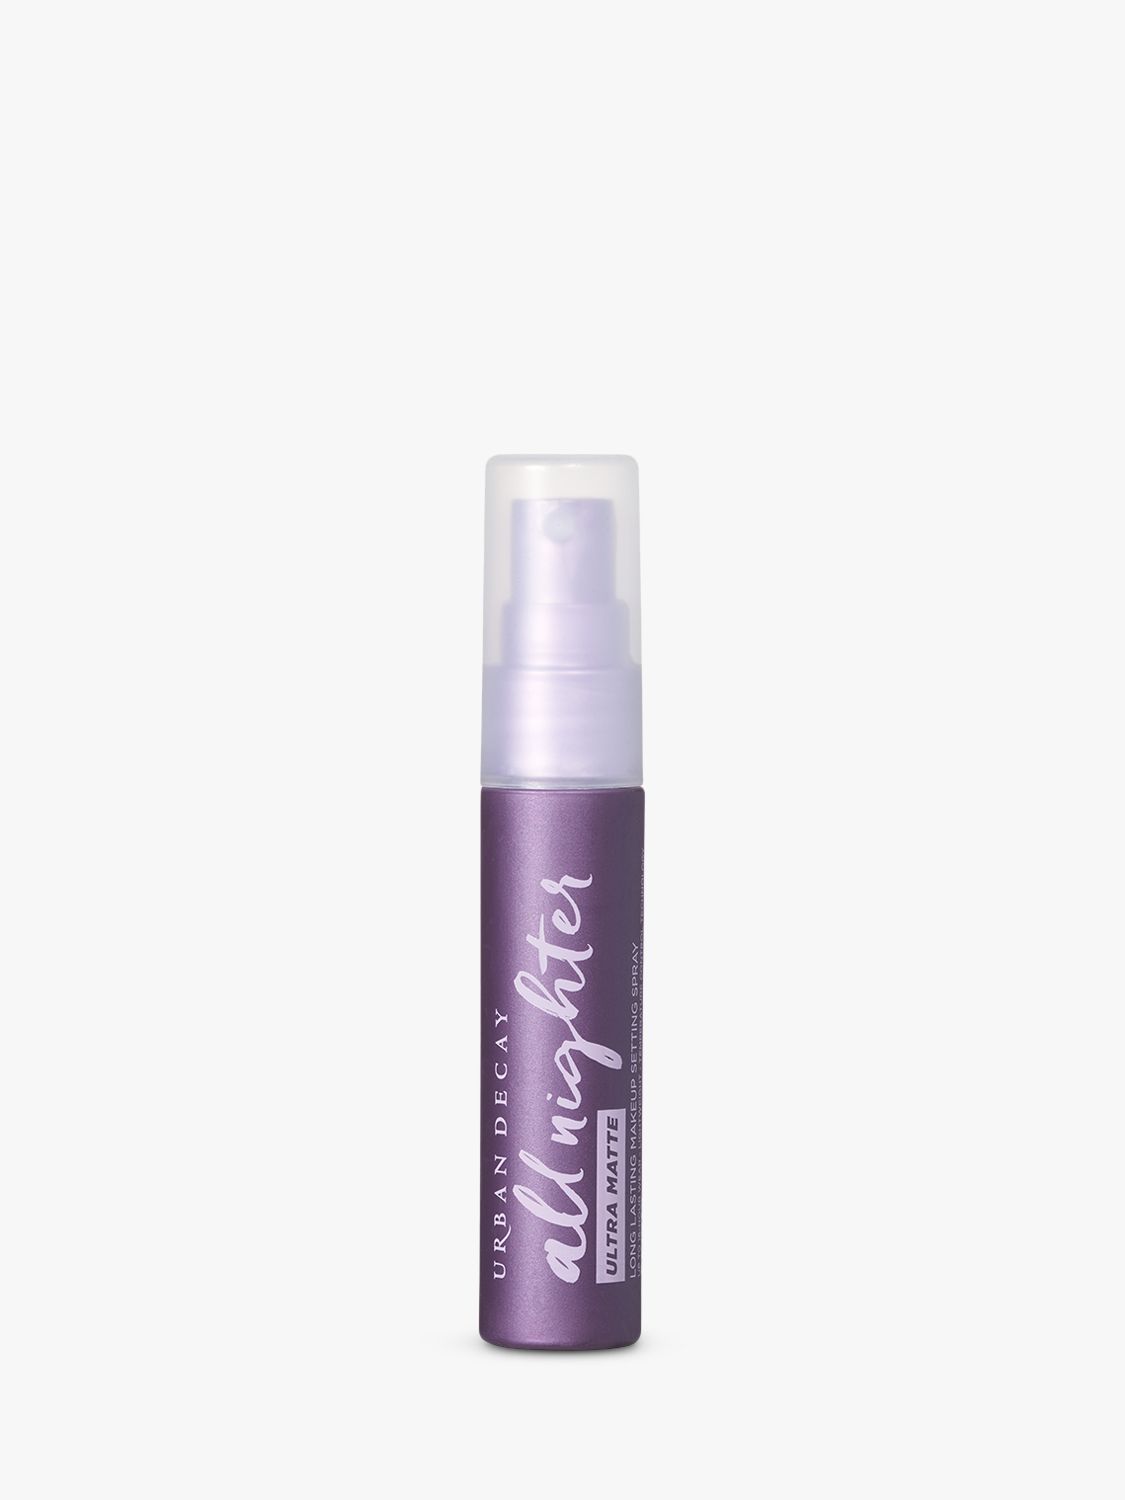 urban decay travel size all nighter ultra matte setting spray